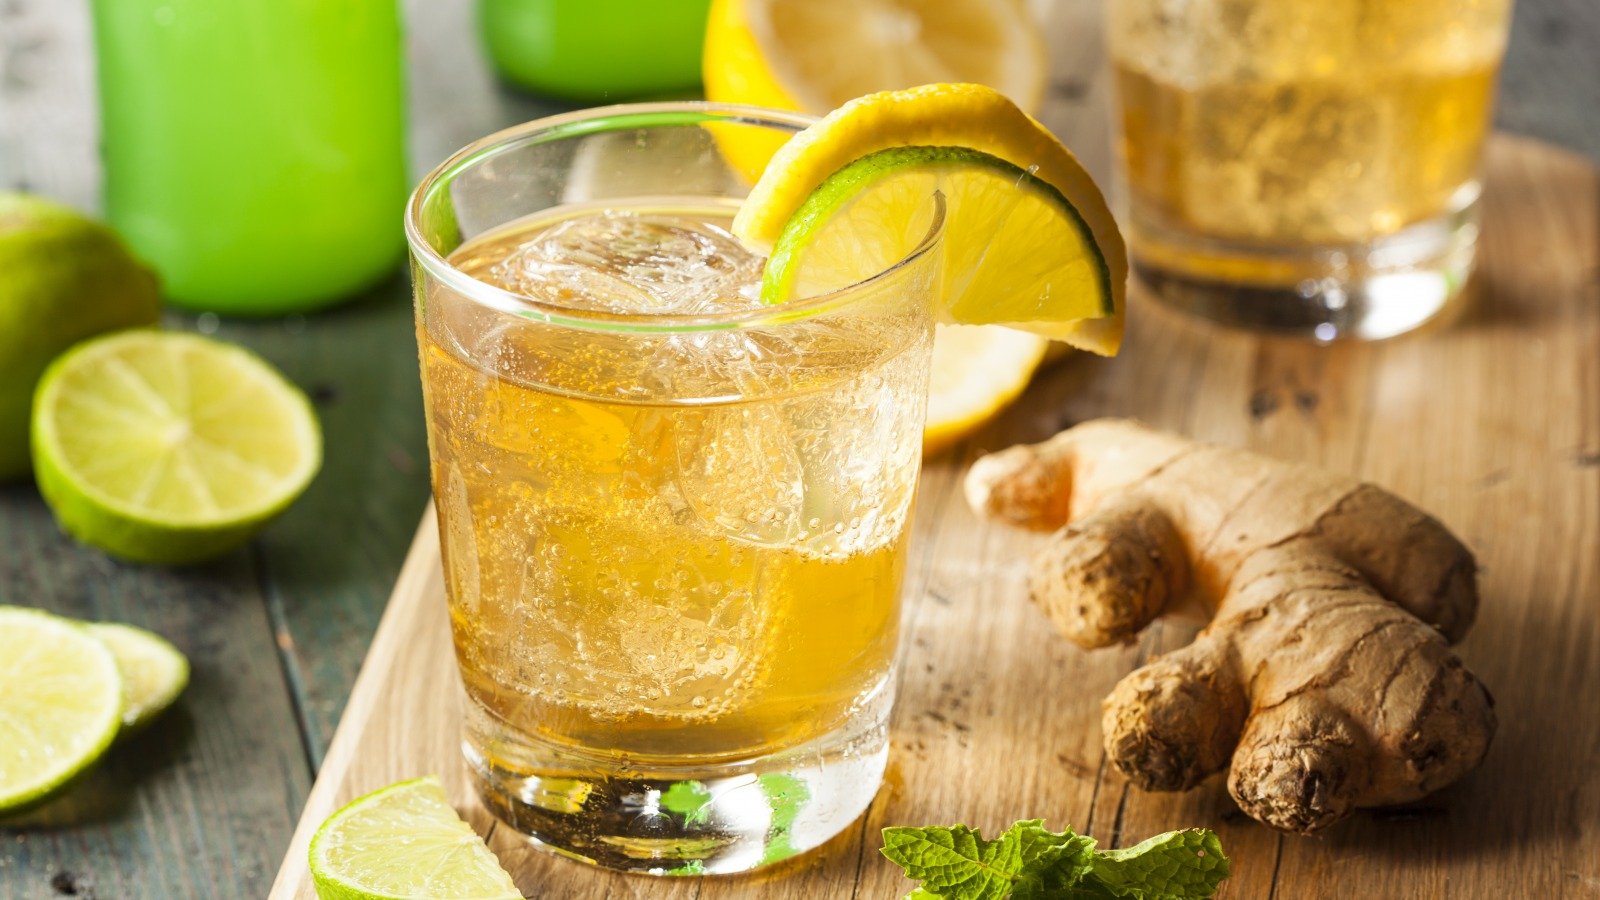 Ginger Ale Vs. Ginger Beer: Which Is Better For An Upset Stomach? - Mashed